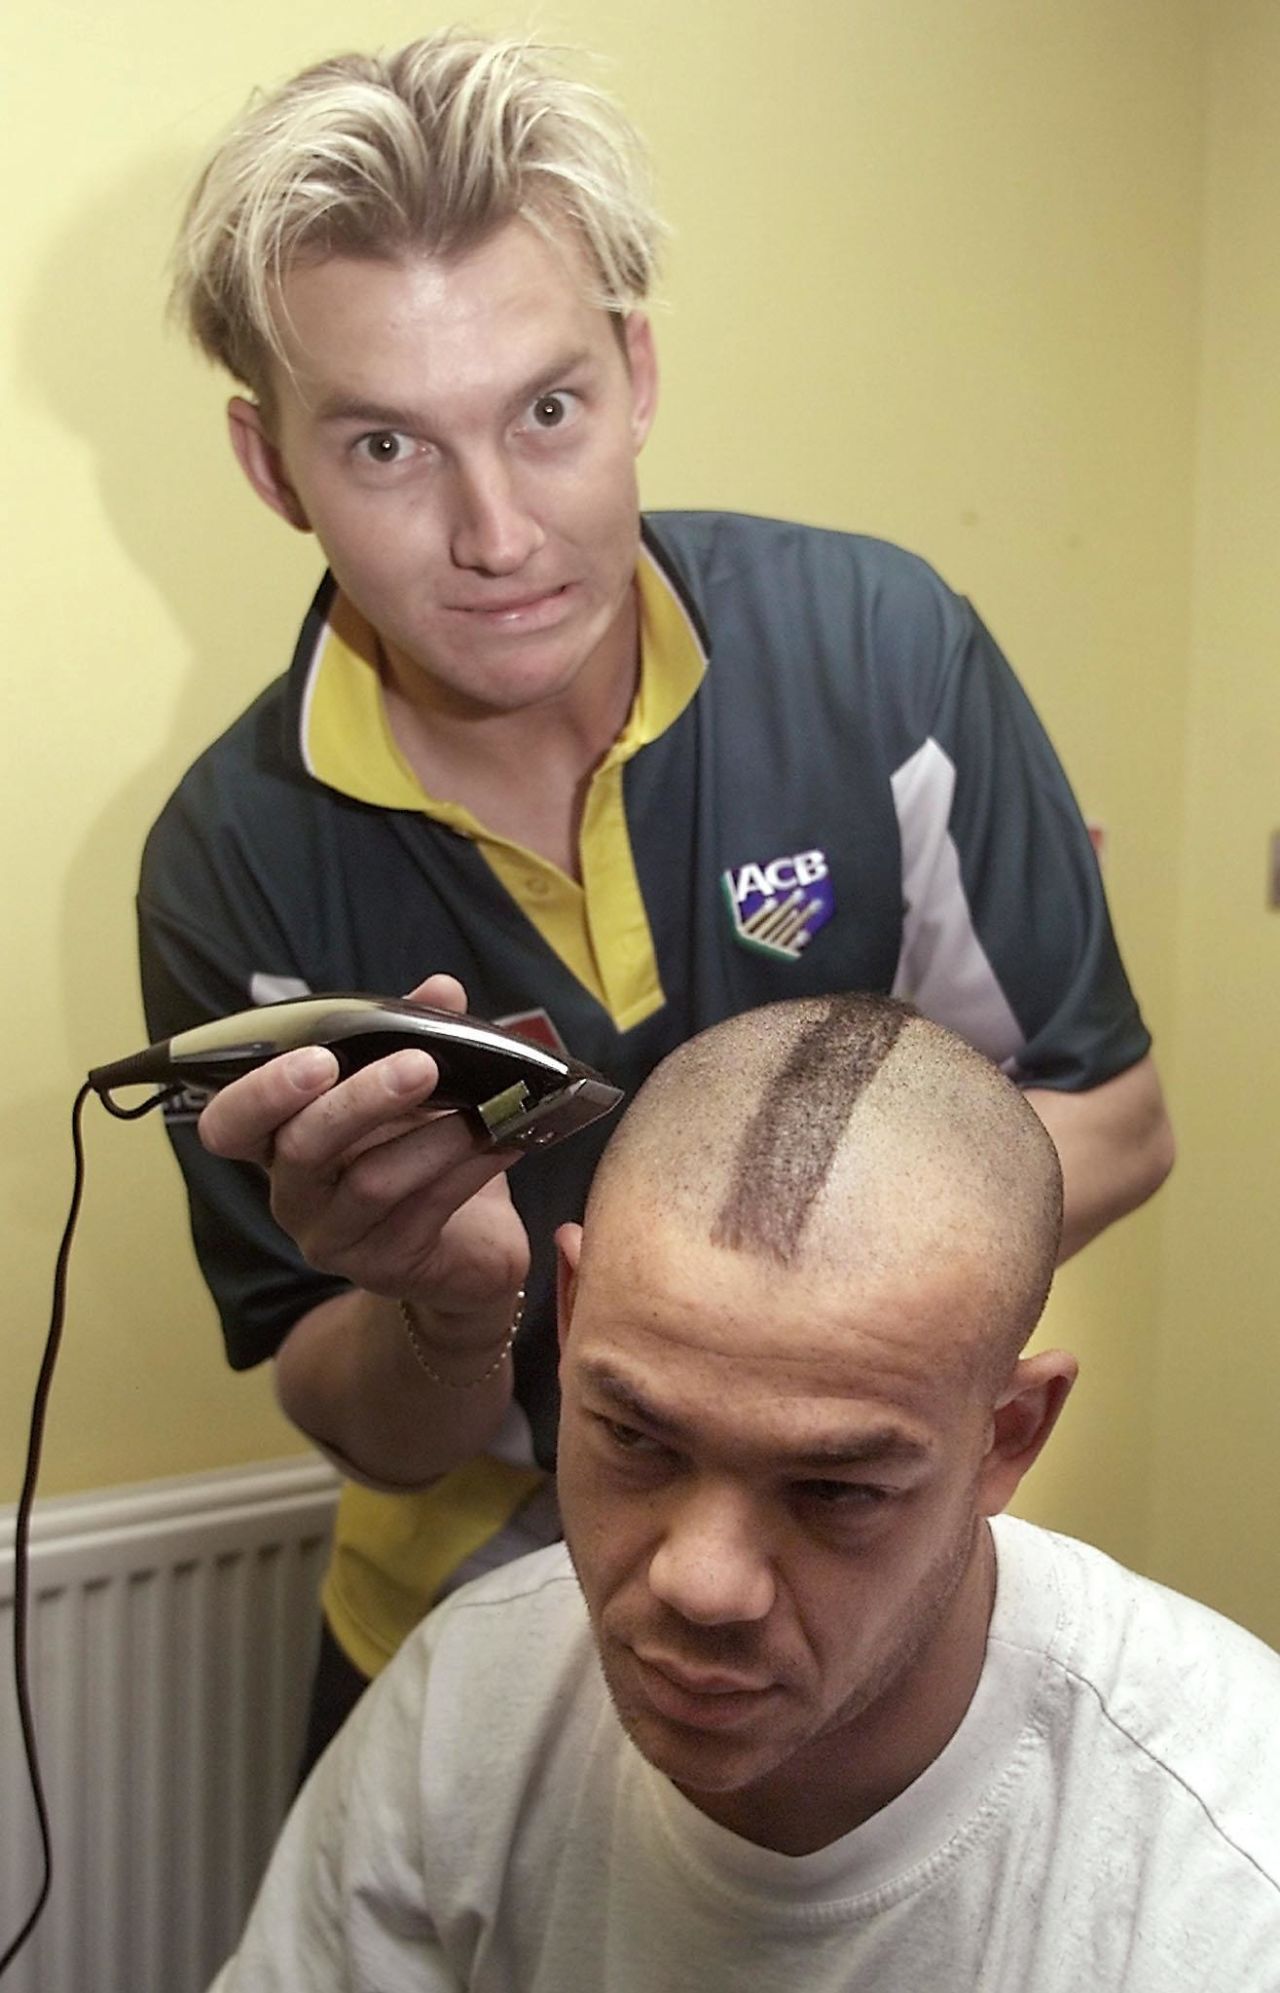 Brett Lee gives a look of apprehension to Andrew Symonds while giving him a Mohawk haircut, 6th ODI at Chester-le-Street, 16 June 2001.